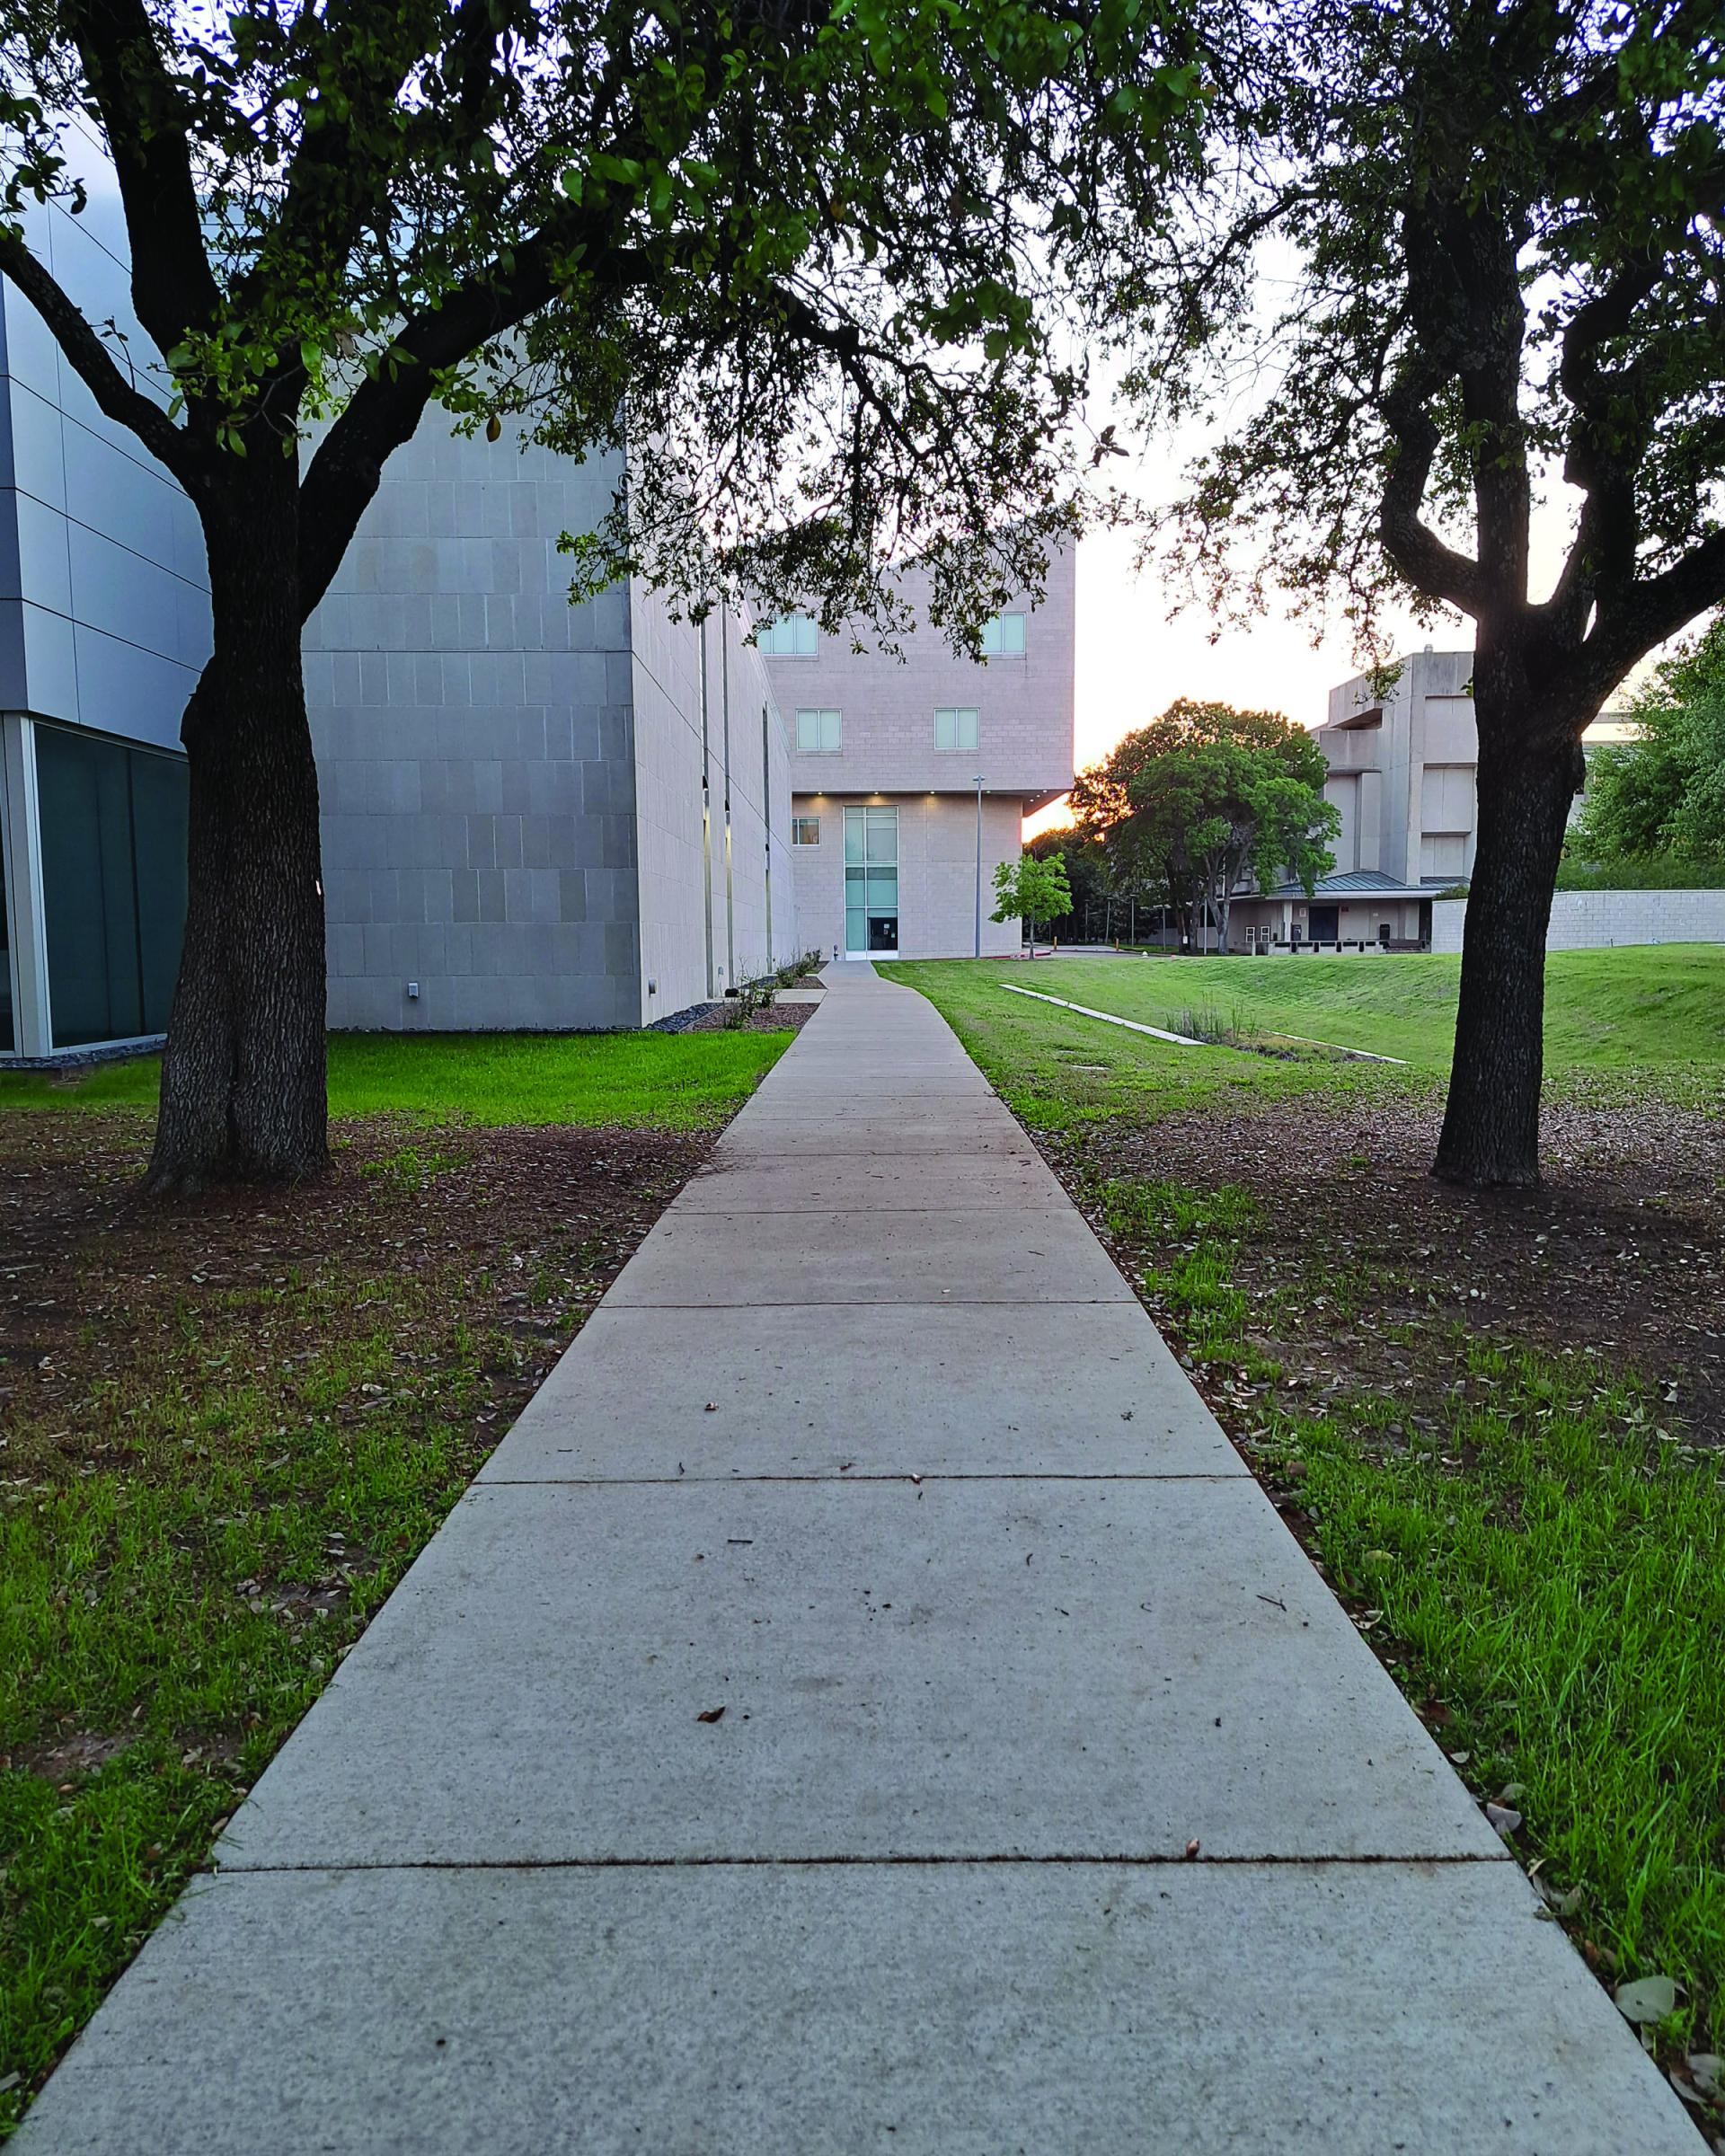 Image of the location of the workshop and material collection. The center of the image is a sidewalk with trees and grass on each side and buildings to the left and top of the image.